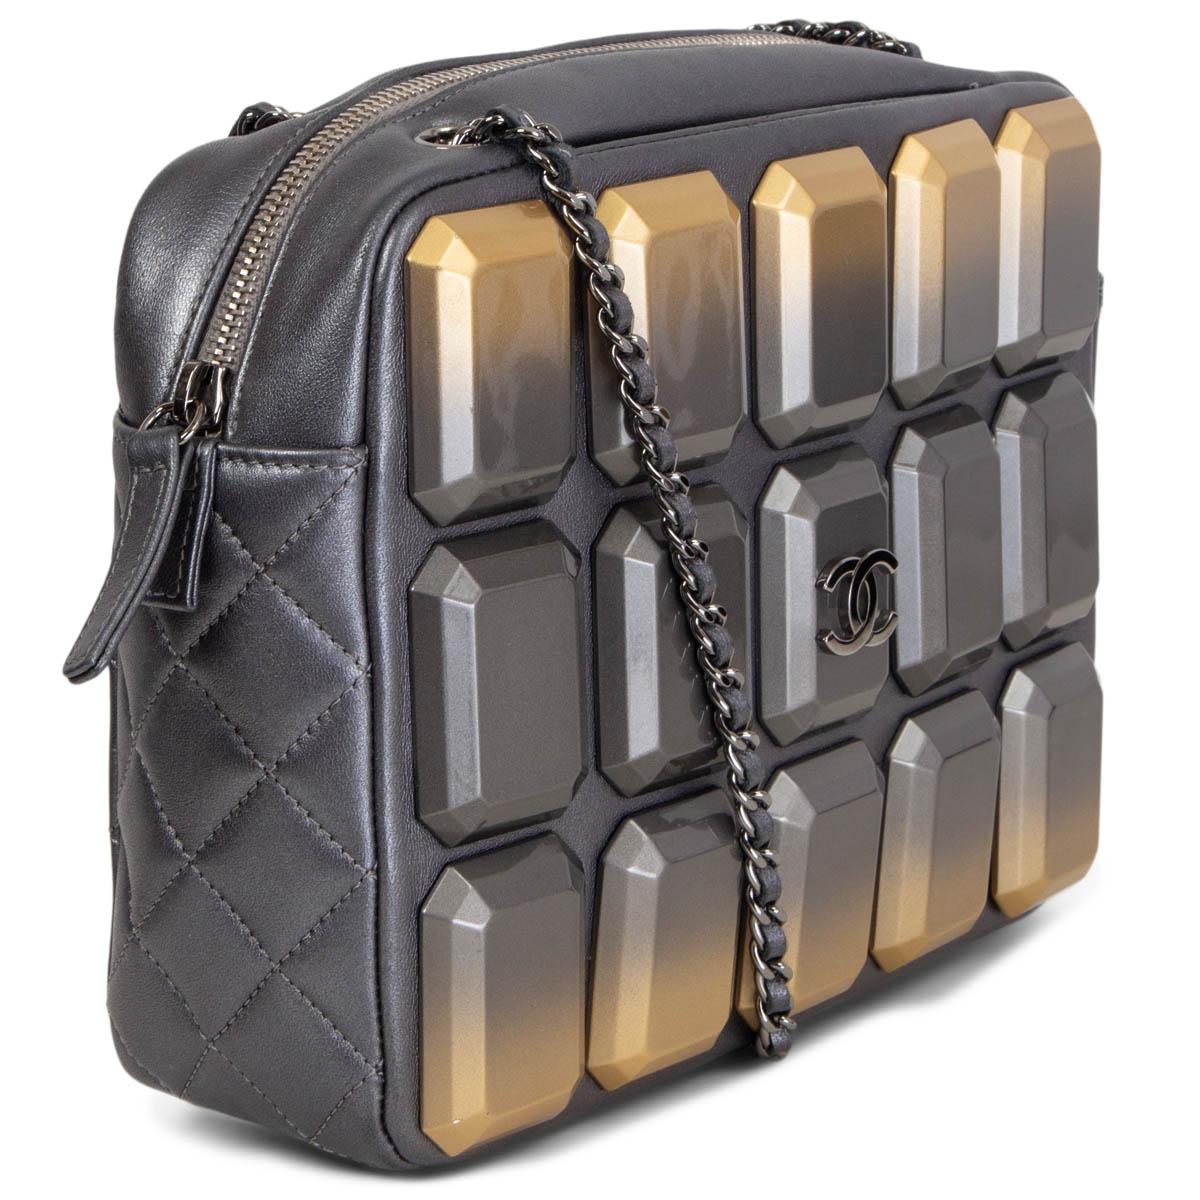 100% authentic Chanel 2014 Art Camera shoulder bag in dark metallic pewter grey quilted leather. The front is covered in faceted resin rectangles in a gold to smoky grey degrade. Zippered top accesses to the grey grosgrain fabric interior with one